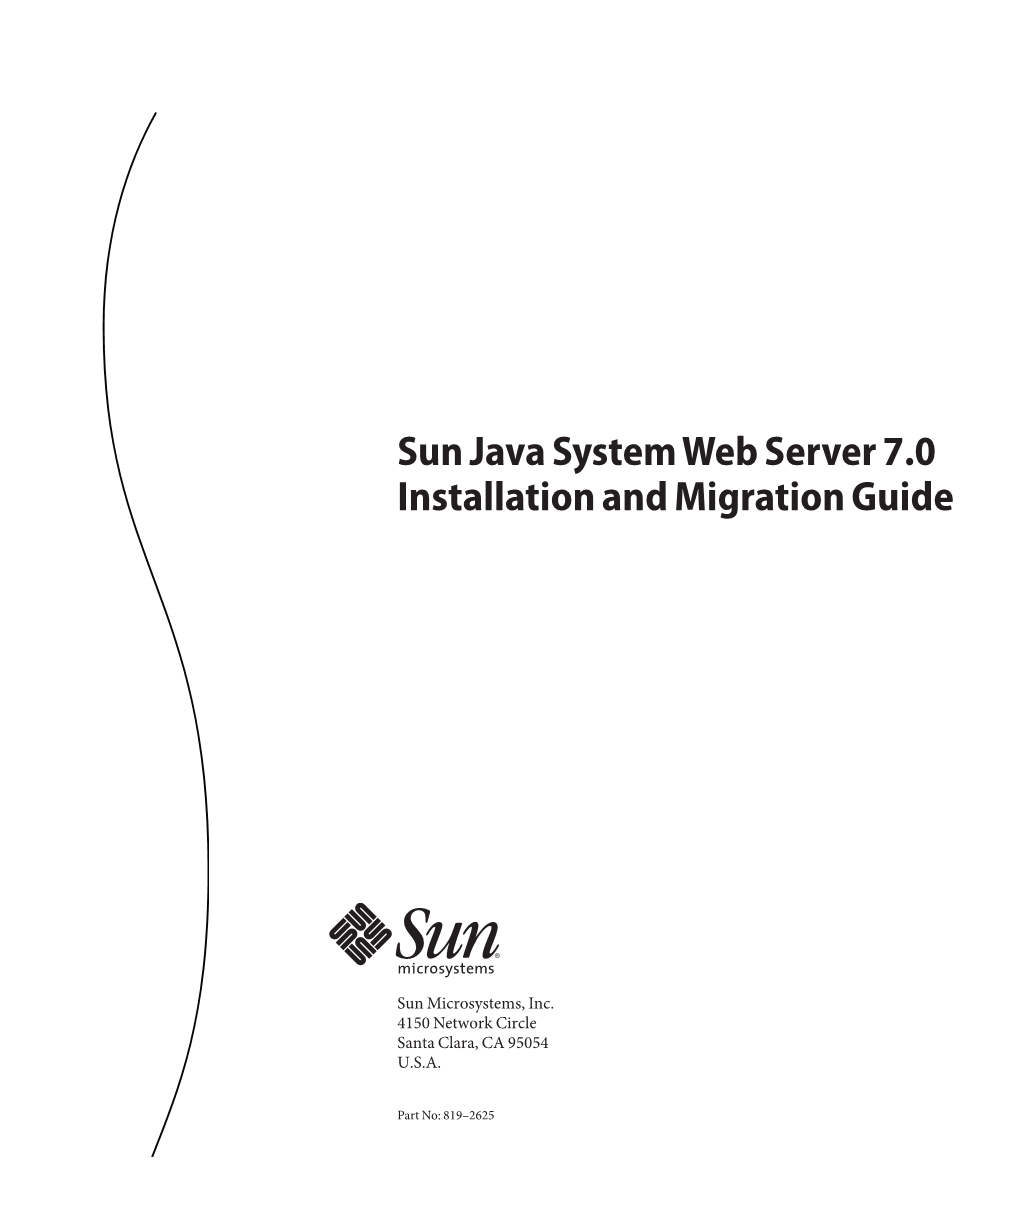 Sun Java System Web Server 7.0 Installation and Migration Guide